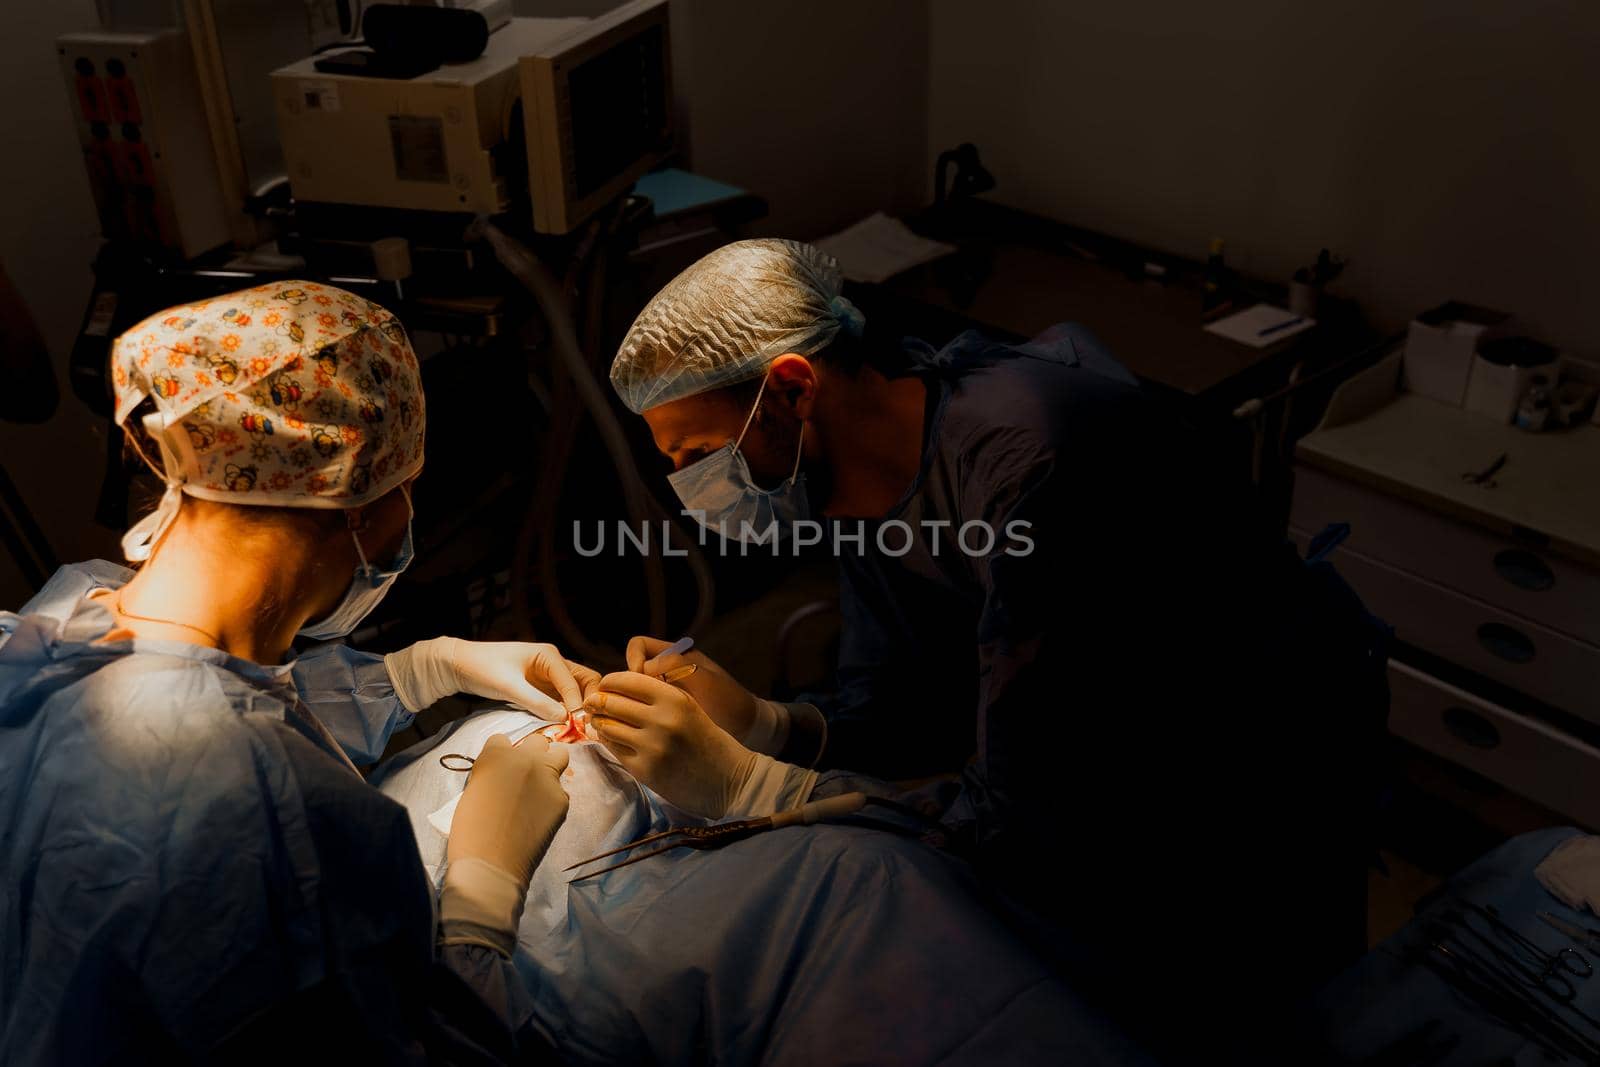 Blepharoplasty plastic surgery operation for modifying the eye region of the face in medical clinic. Surgeon makes an incision with a surgical knife